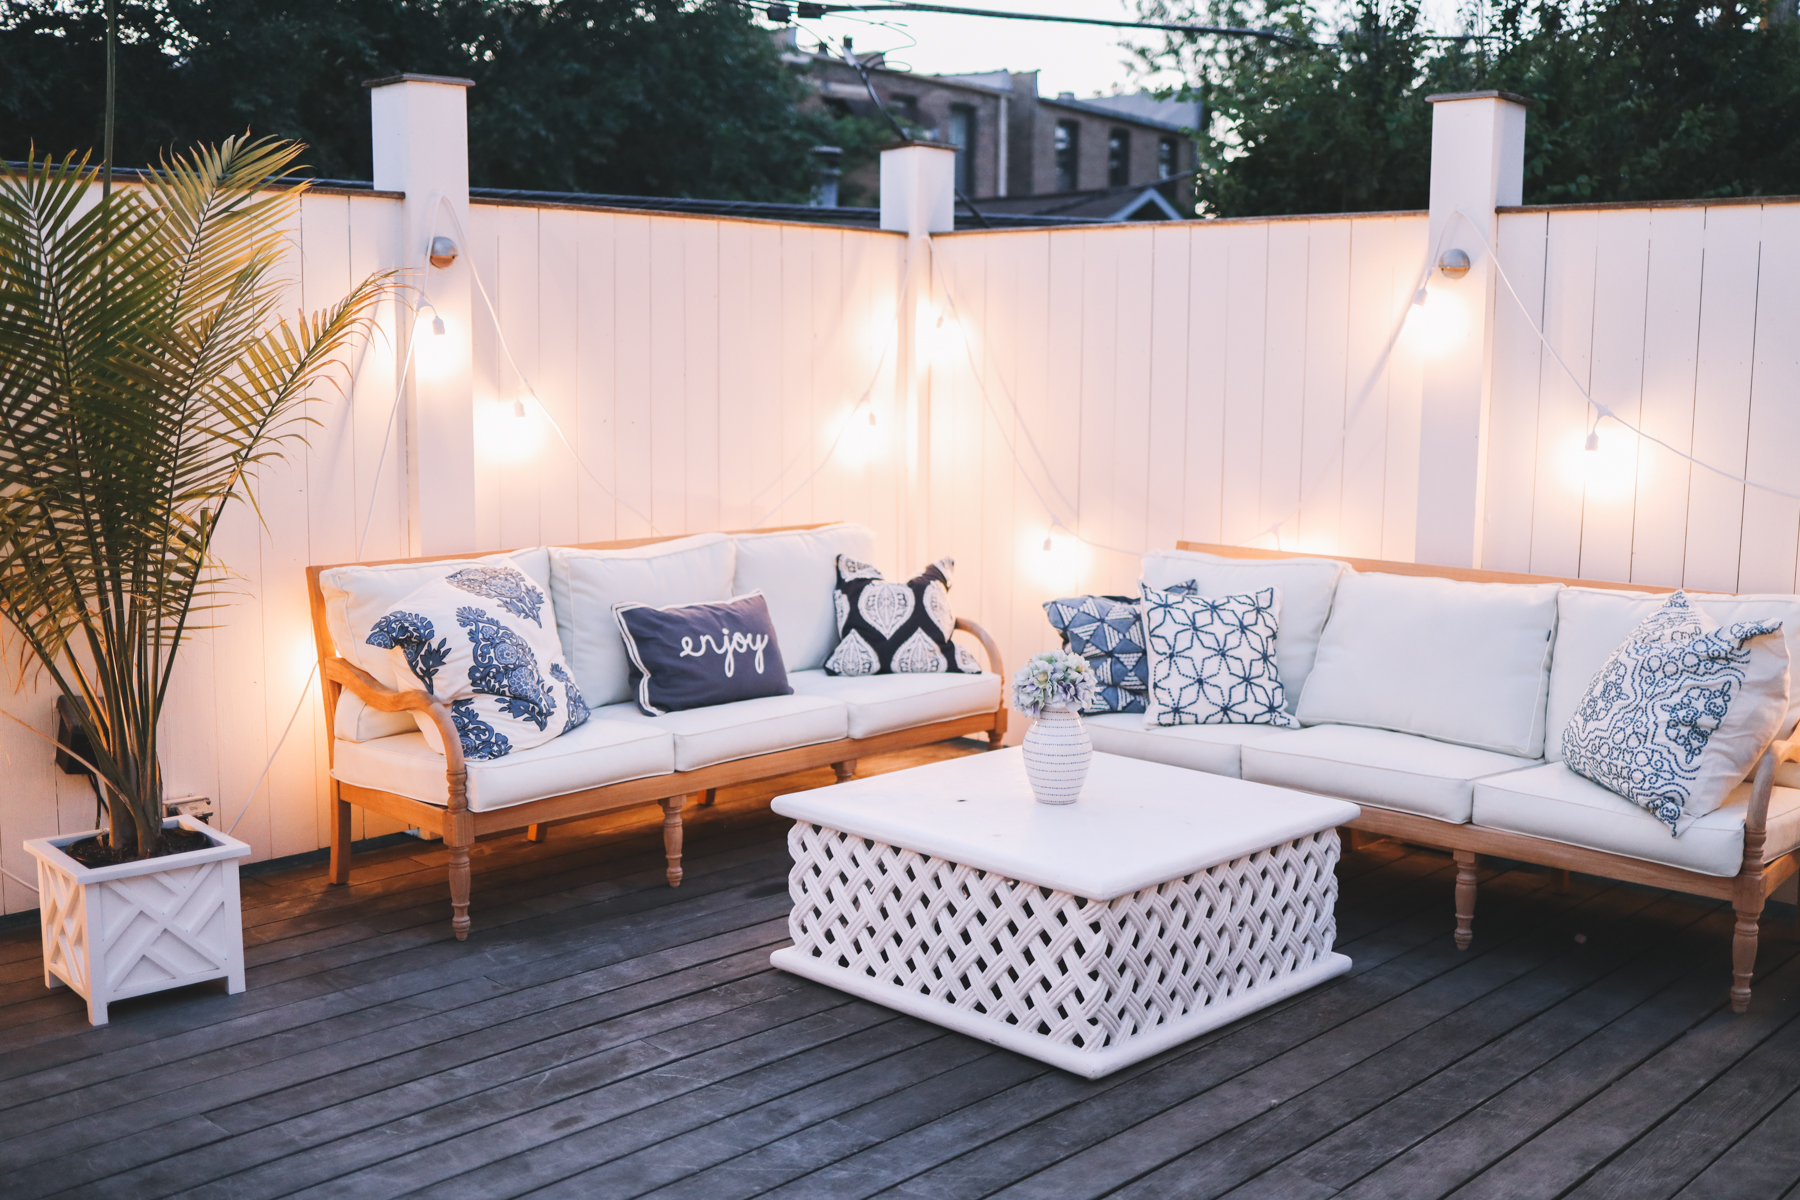  pretty outdoor space